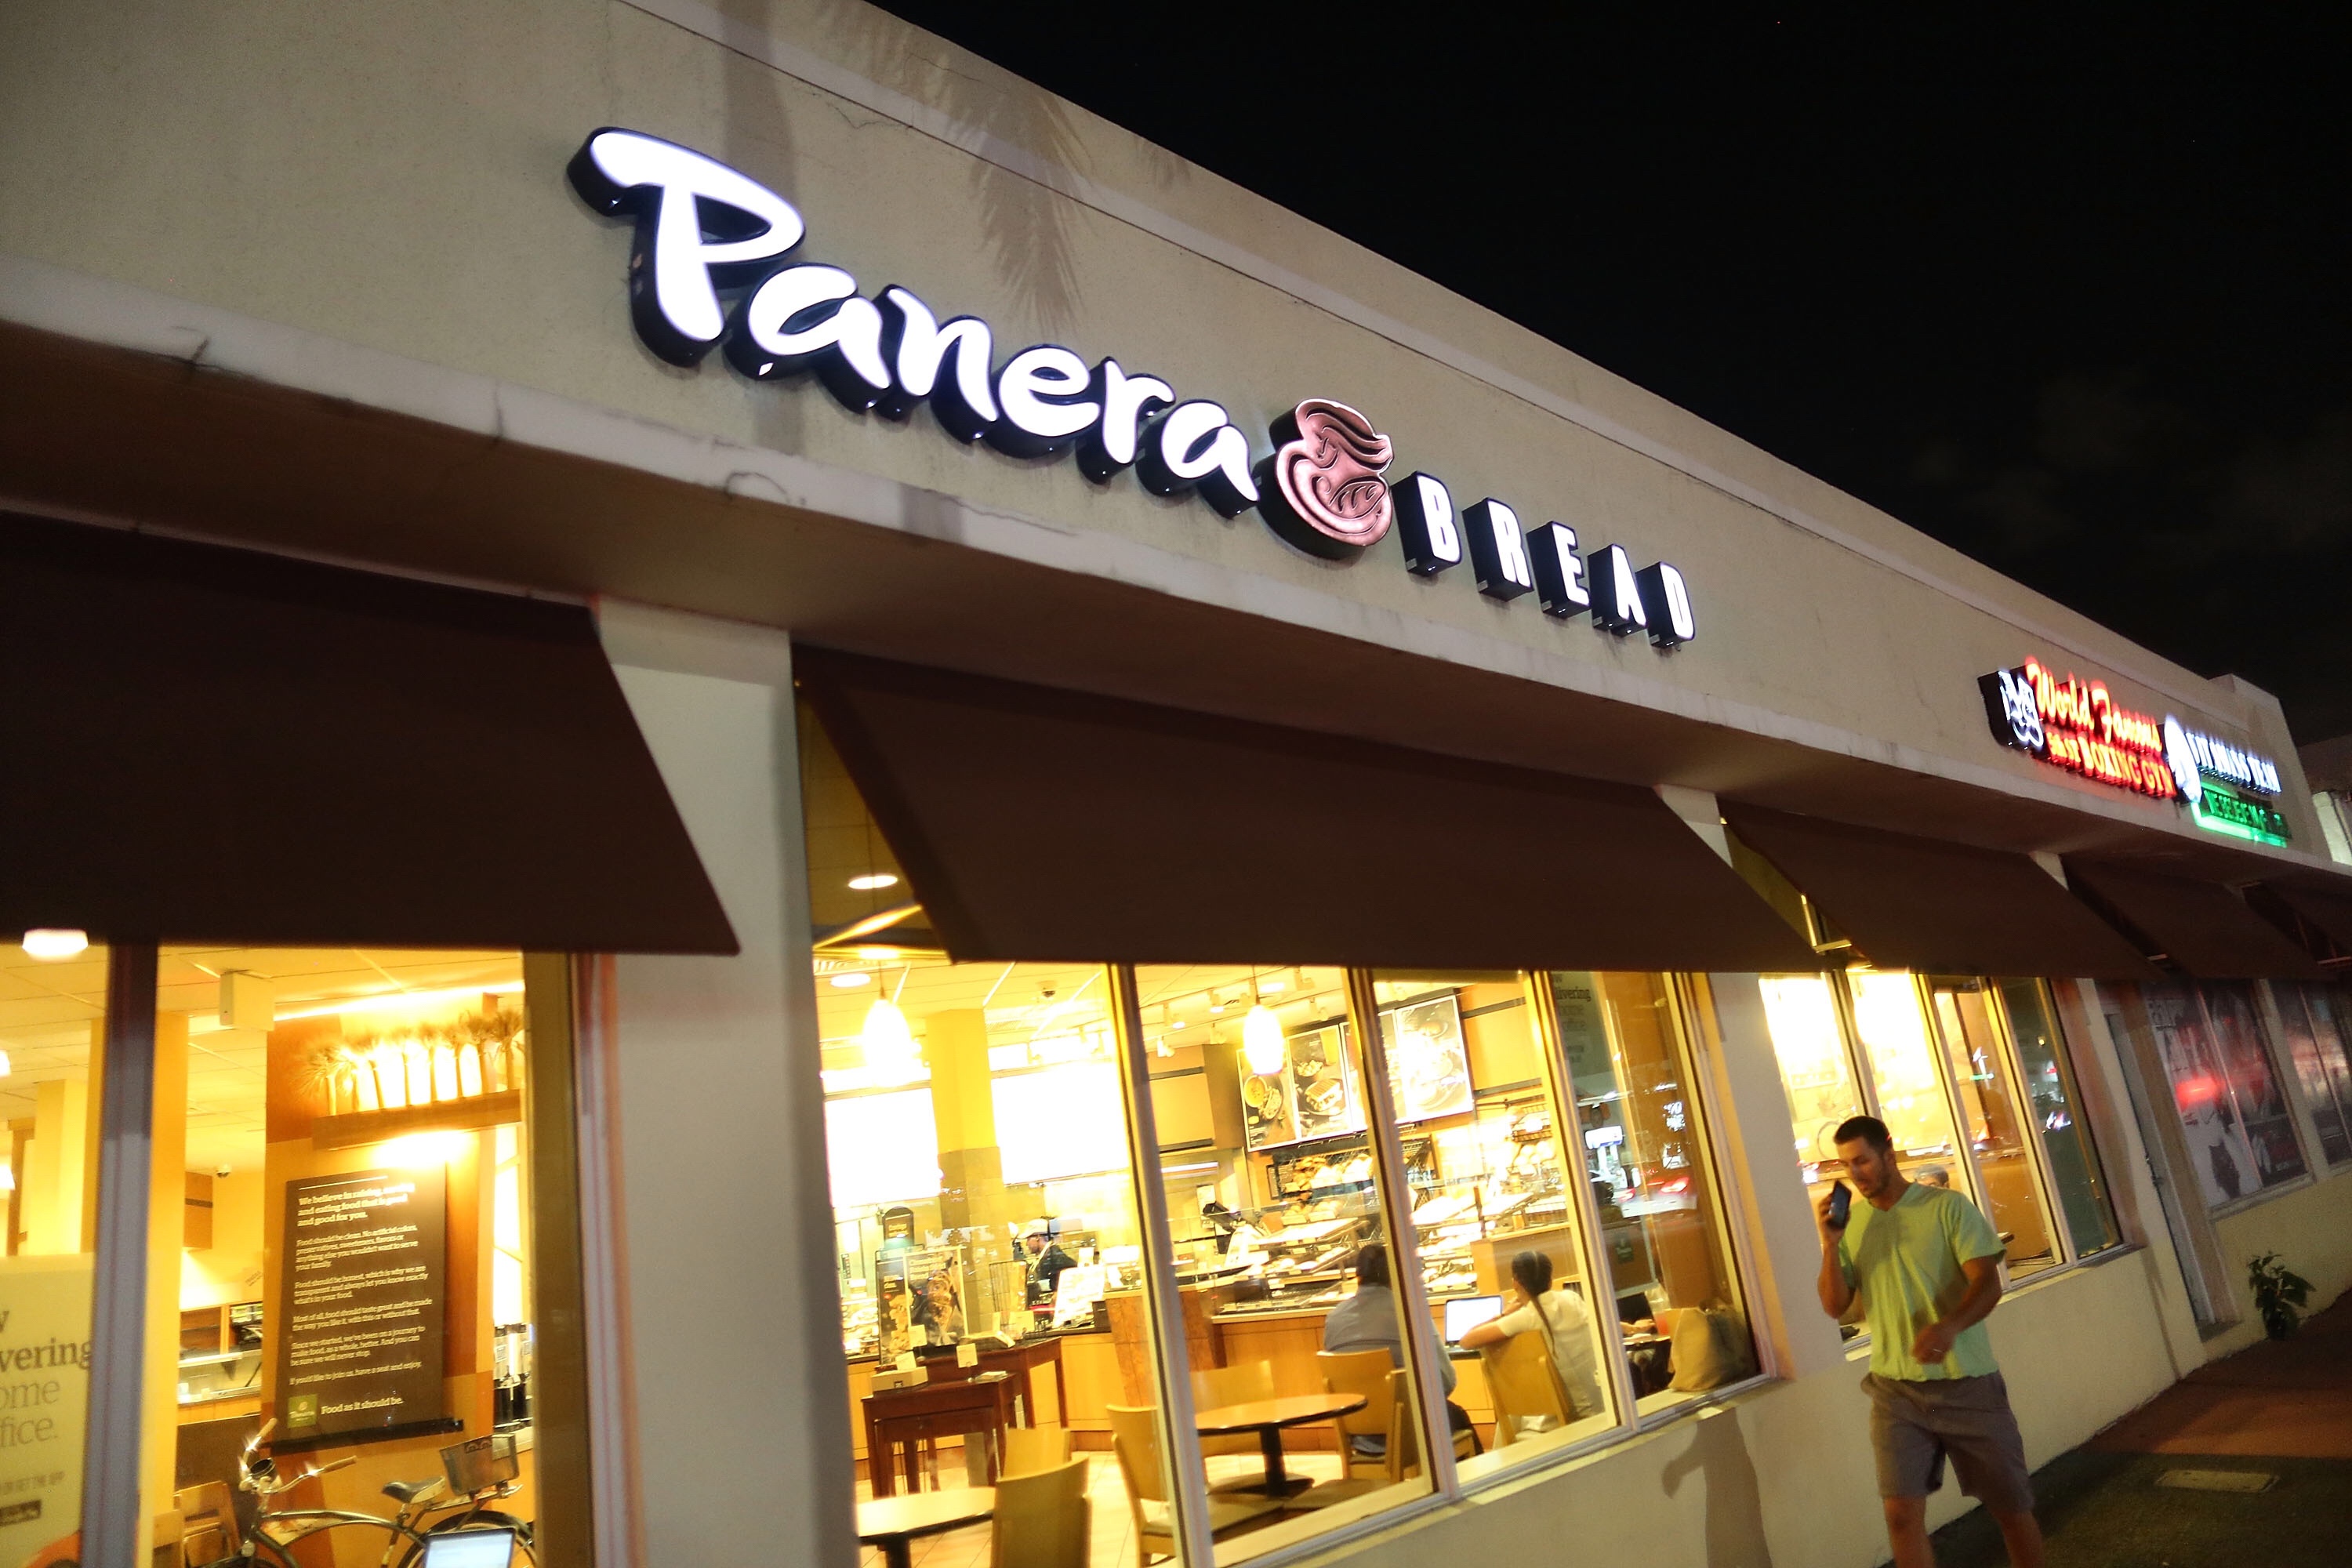 Panera Bread apparently left millions of customer records exposed online